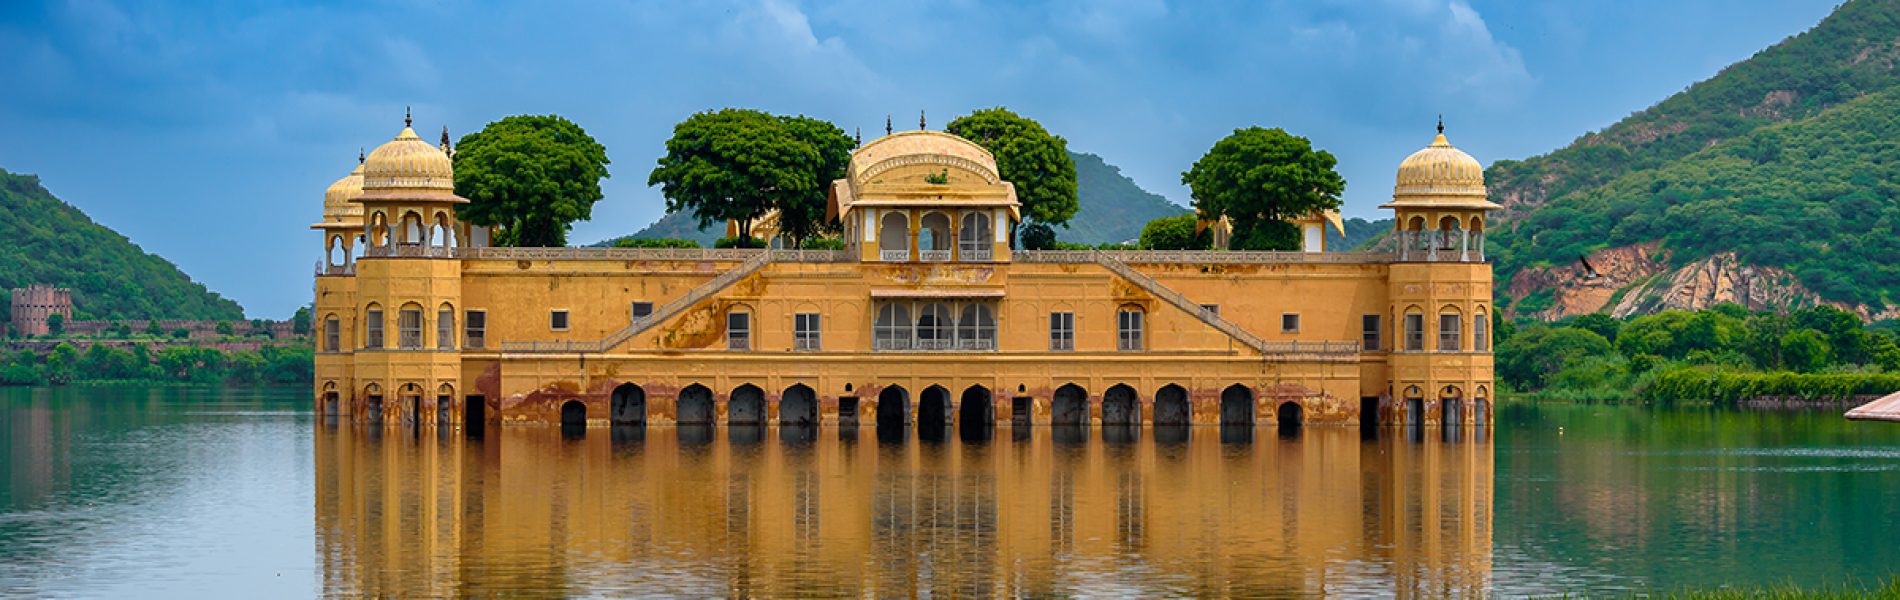 View of Jal Mahal ,a palace in the middle of the Man Sagar Lake